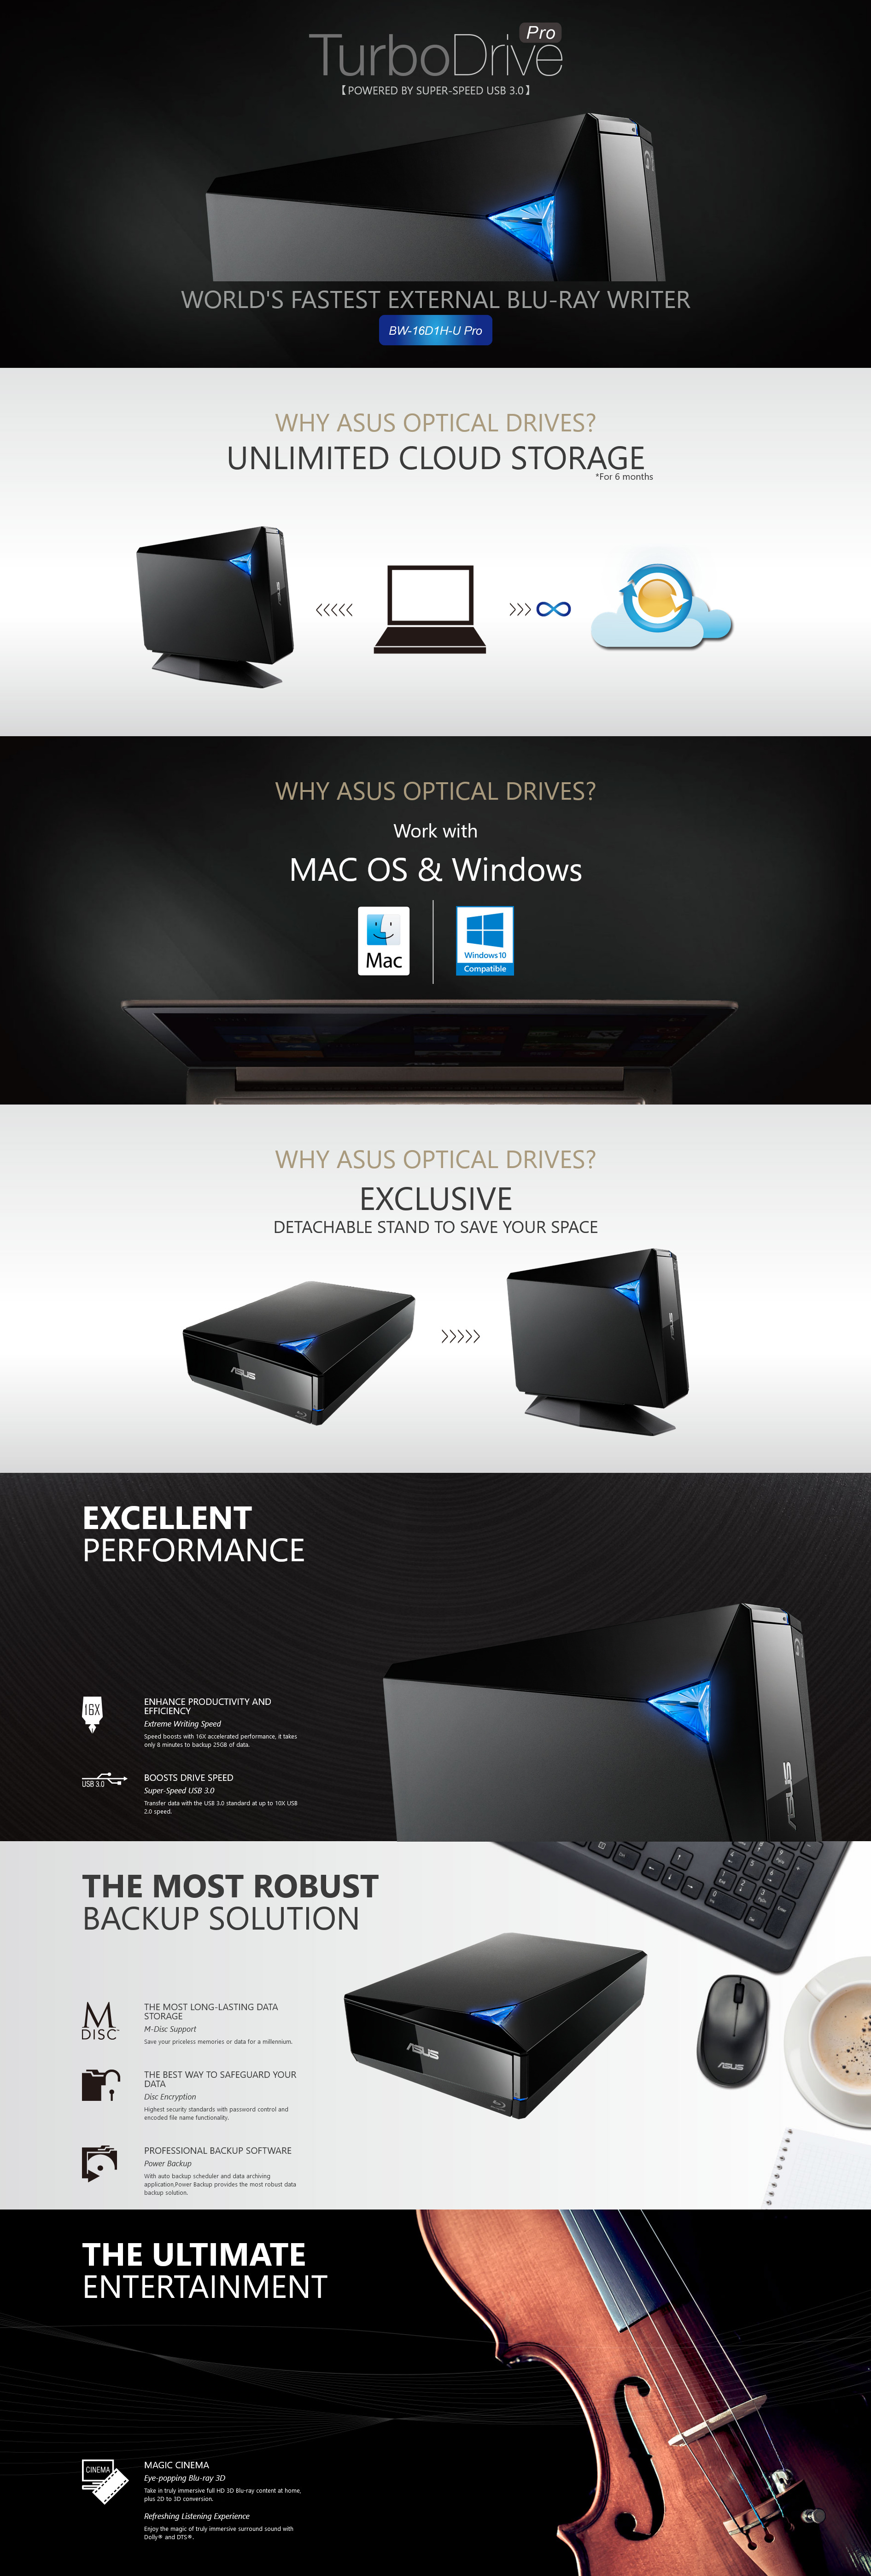 A large marketing image providing additional information about the product ASUS BW-16D1H-U PRO External USB3.0 Blu-Ray Writer - Black  - Additional alt info not provided